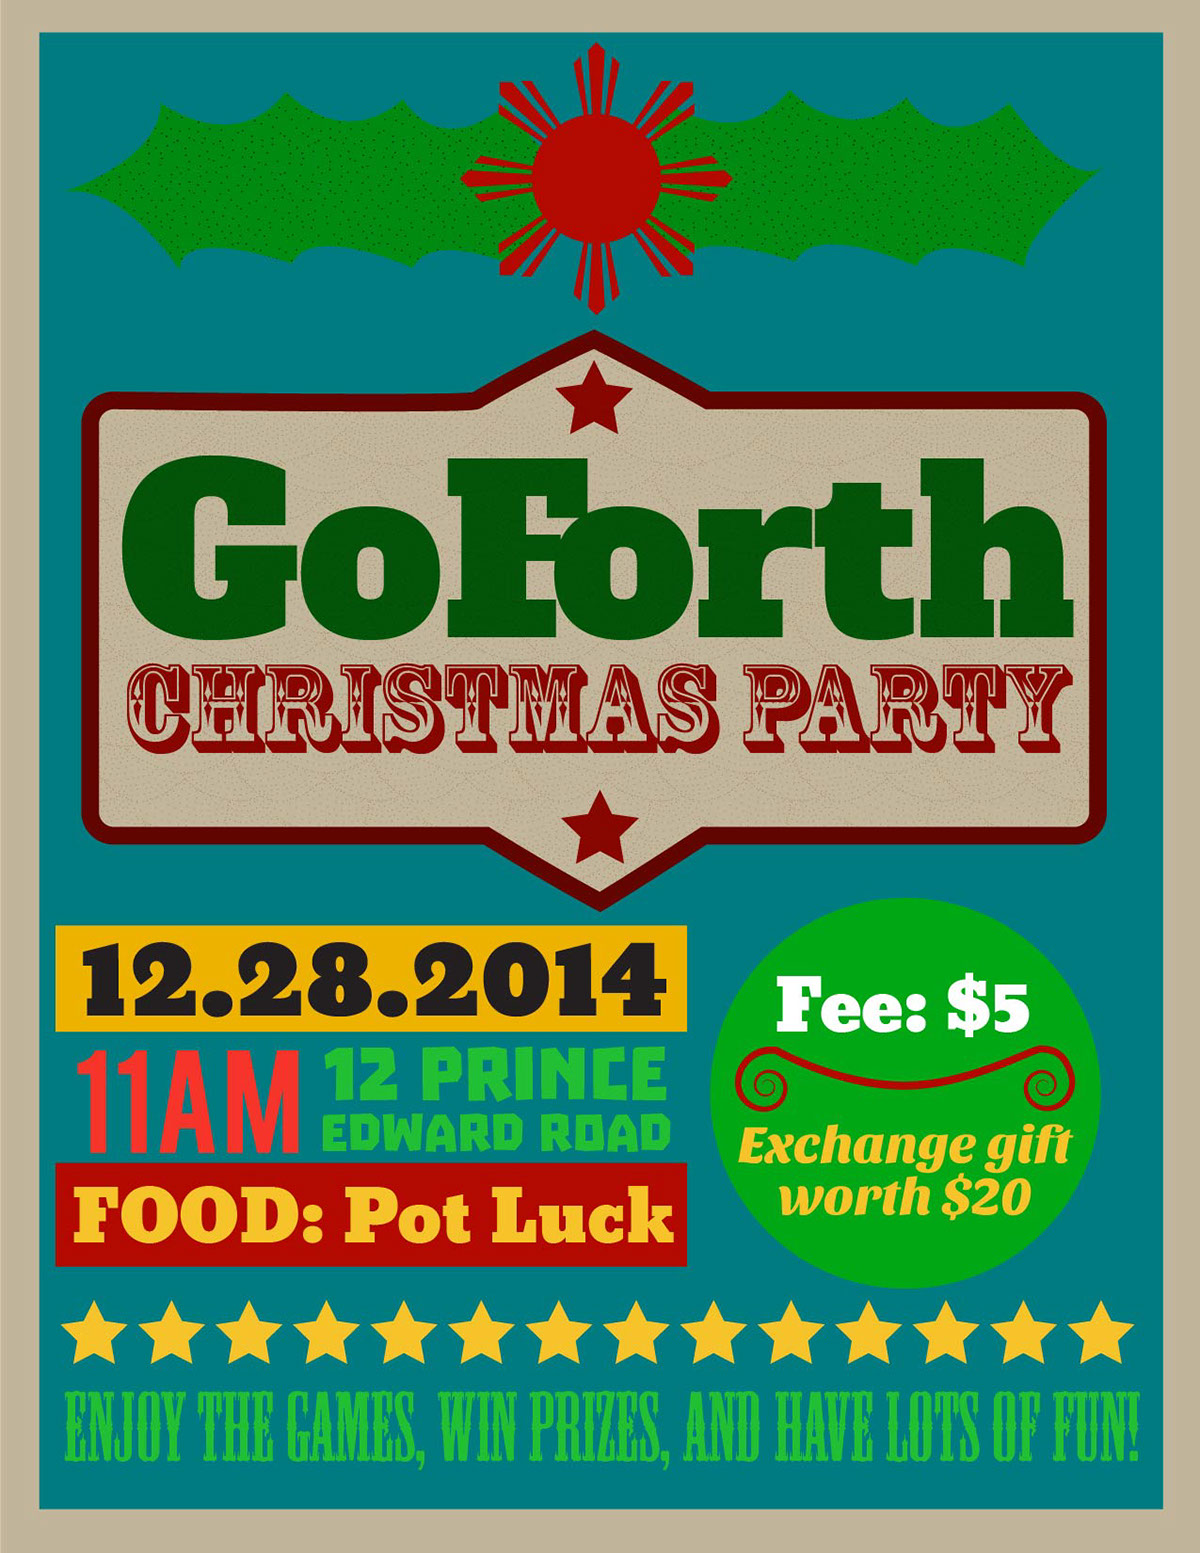 Goforth christmas party Invitation poster party invite party invitation invite